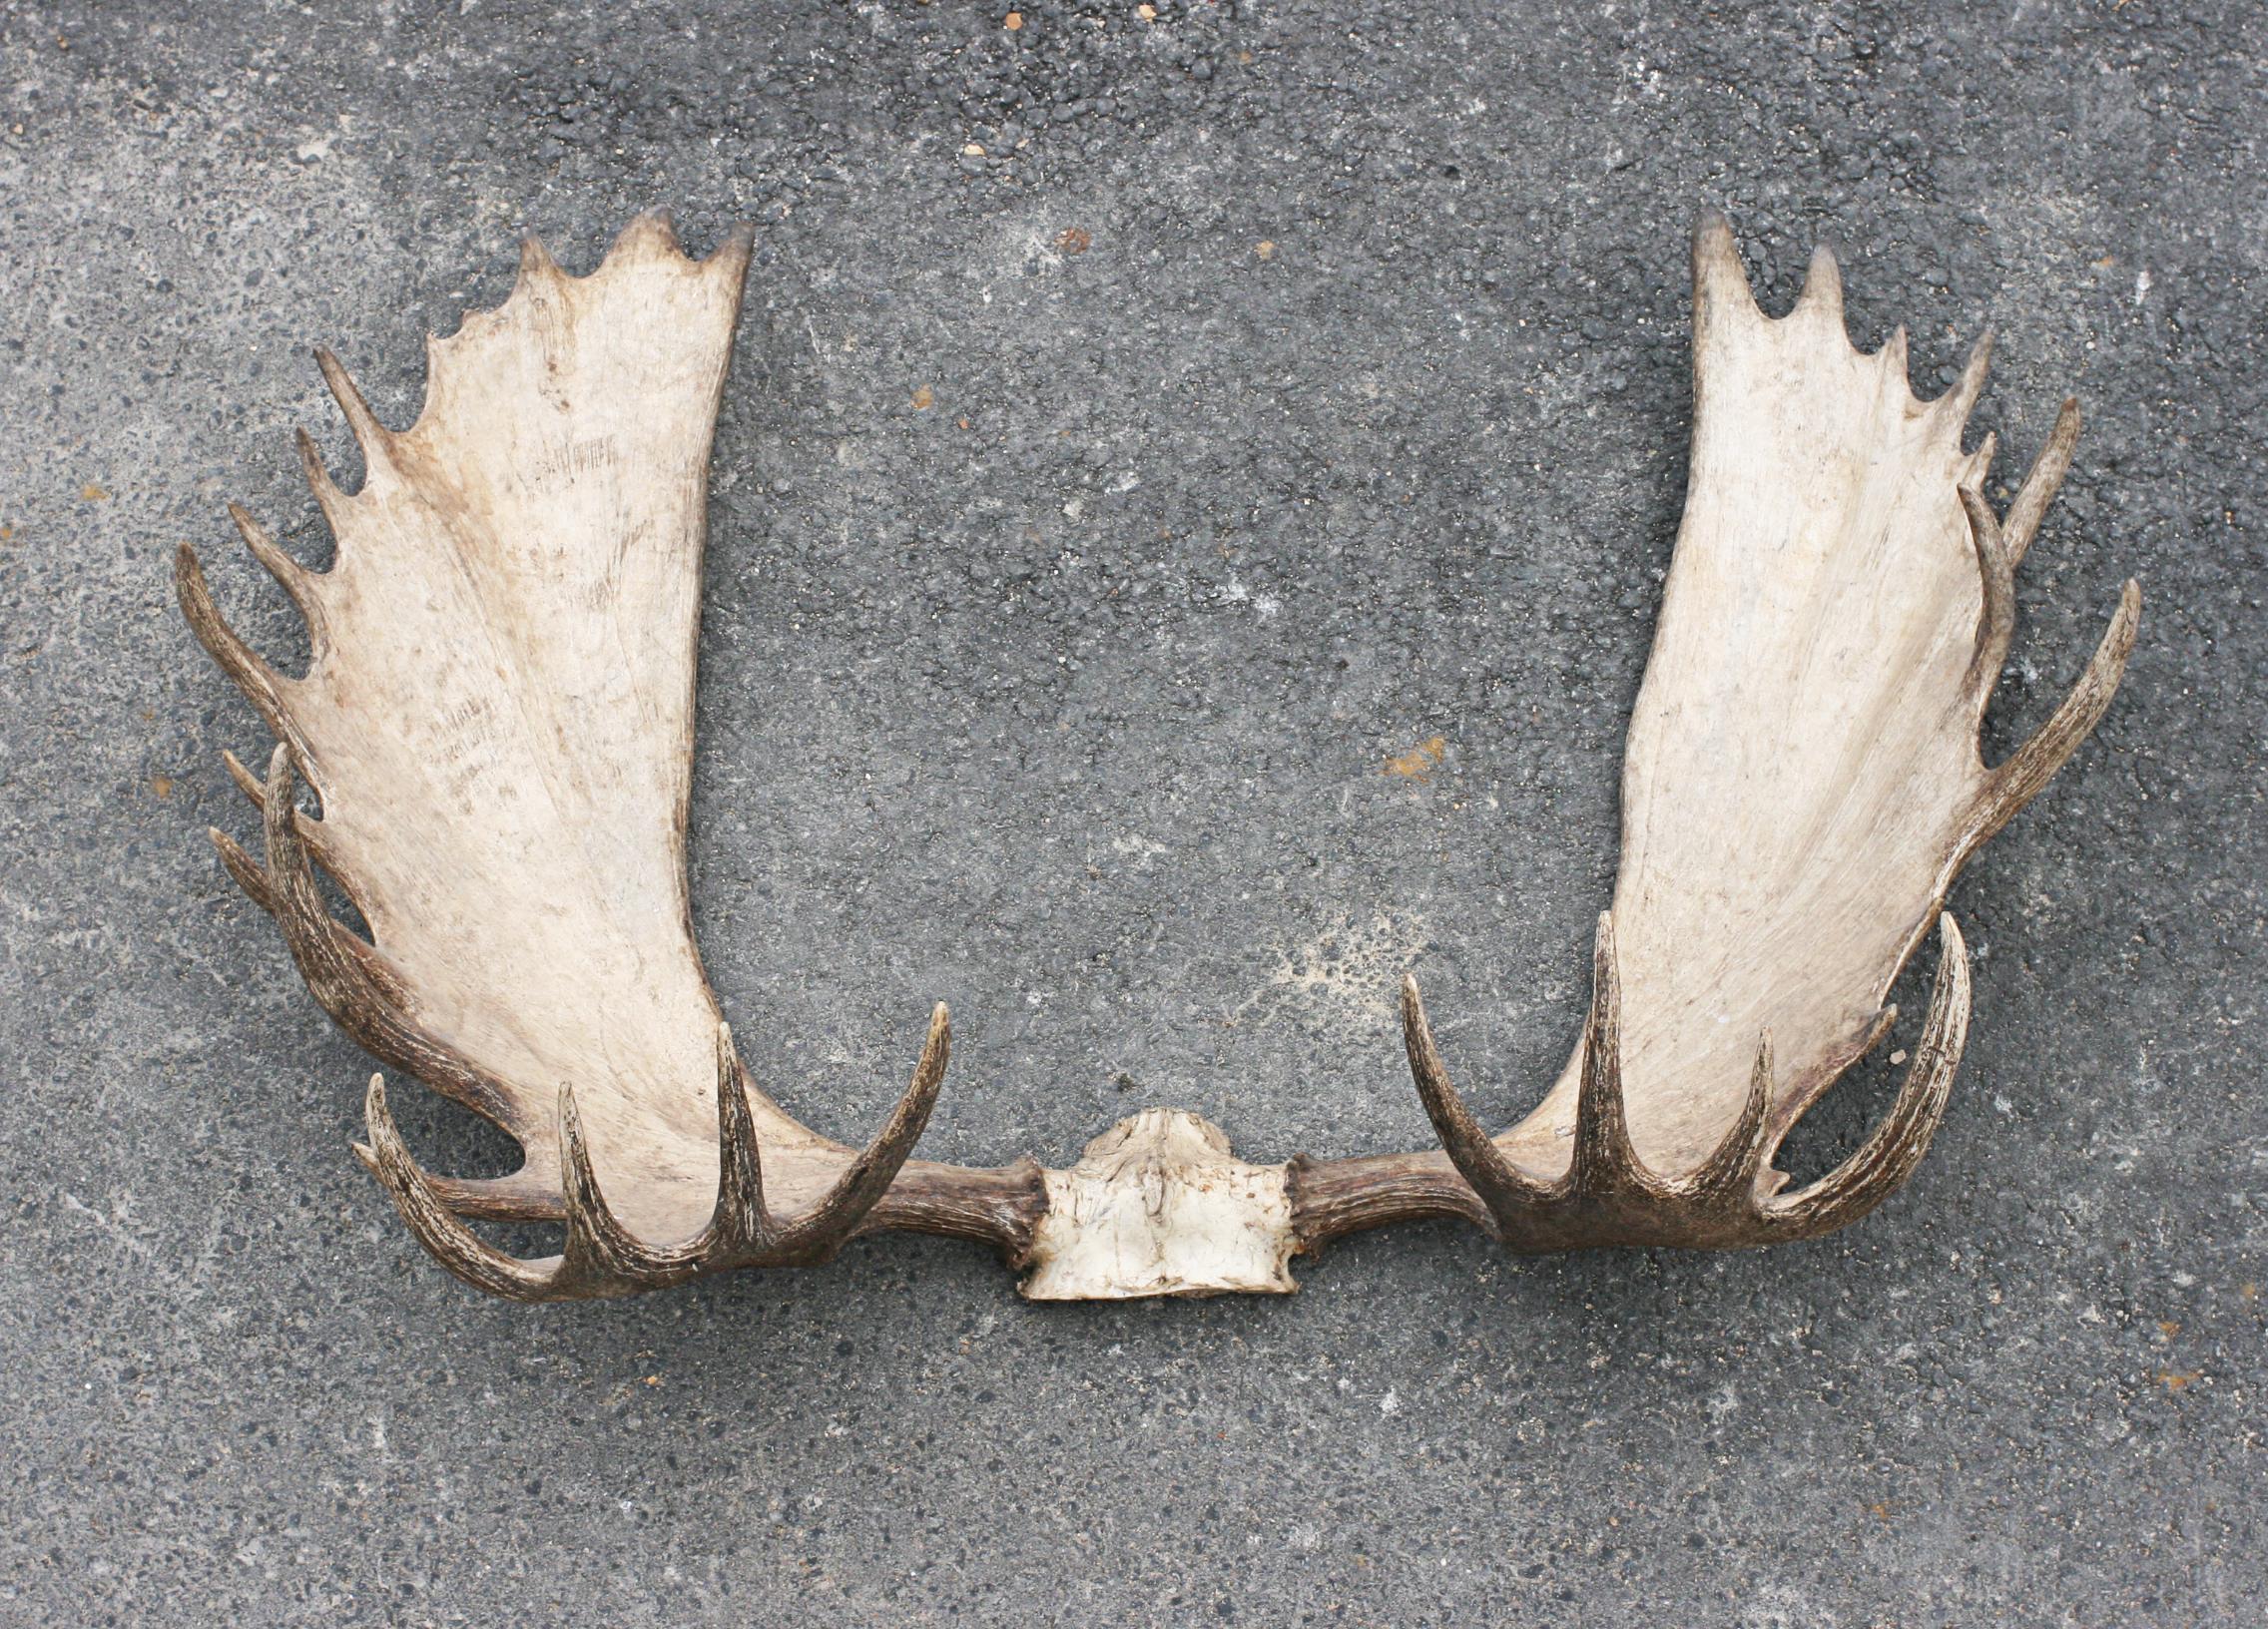 Taxidermy, very large moose antlers, palmate antlers.
An exceptional pair of 30 point Alaska - Yukon Moose antlers. The antlers are with small amount of skull, just above the eye socket and comes with a copy of an award from the 'Boone & Crockett